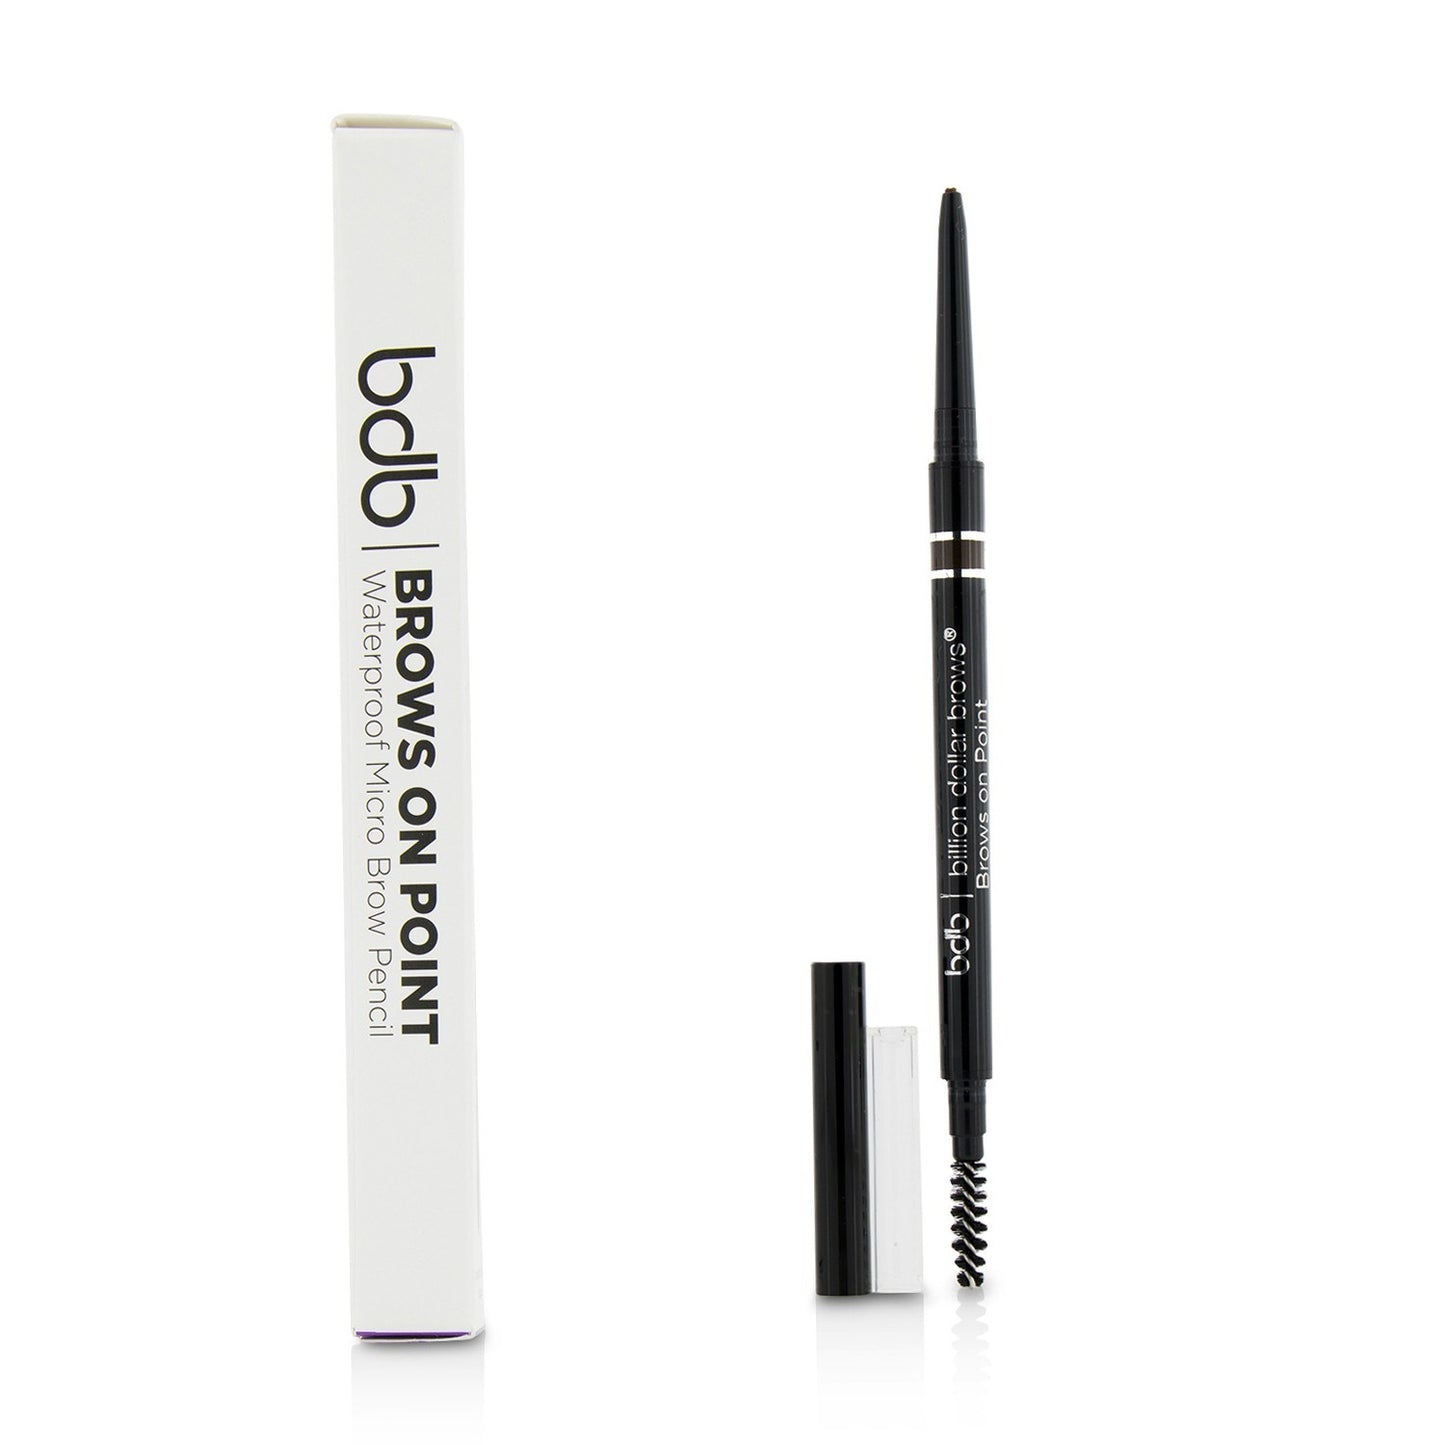 BILLION DOLLAR BROWS - Brows On Point Waterproof Micro Brow Pencil - Taupe 311429 0.045g/0.002oz